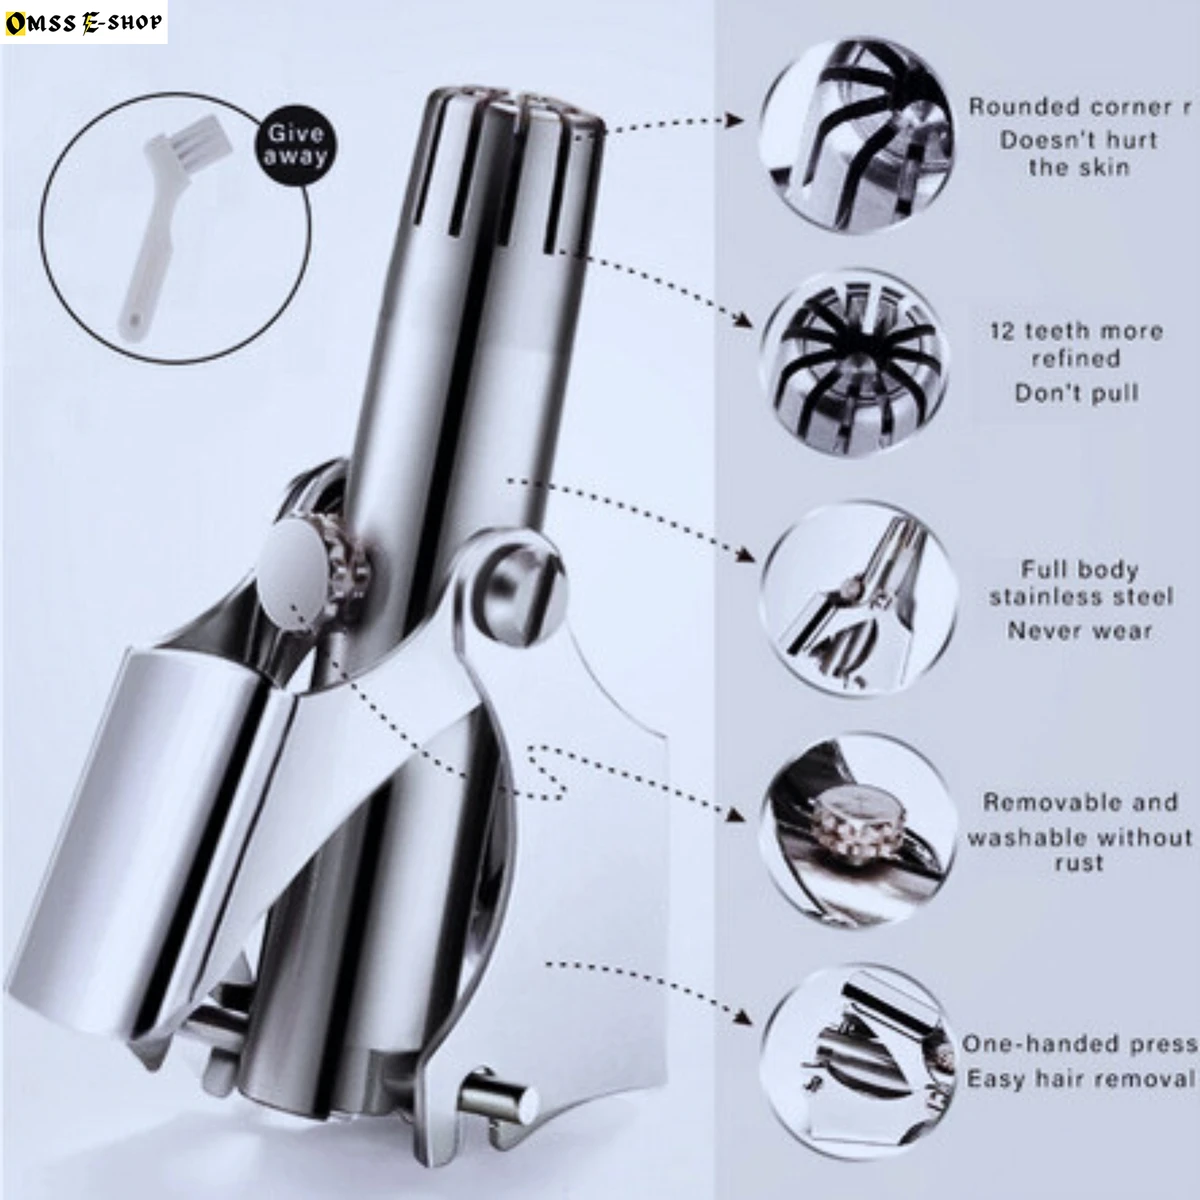 Stainless Steel Nose Ear Trimmer Manual Nose Hair Trimmer Professional Washable Ear Trimmer Shaving Personal Care Appliances